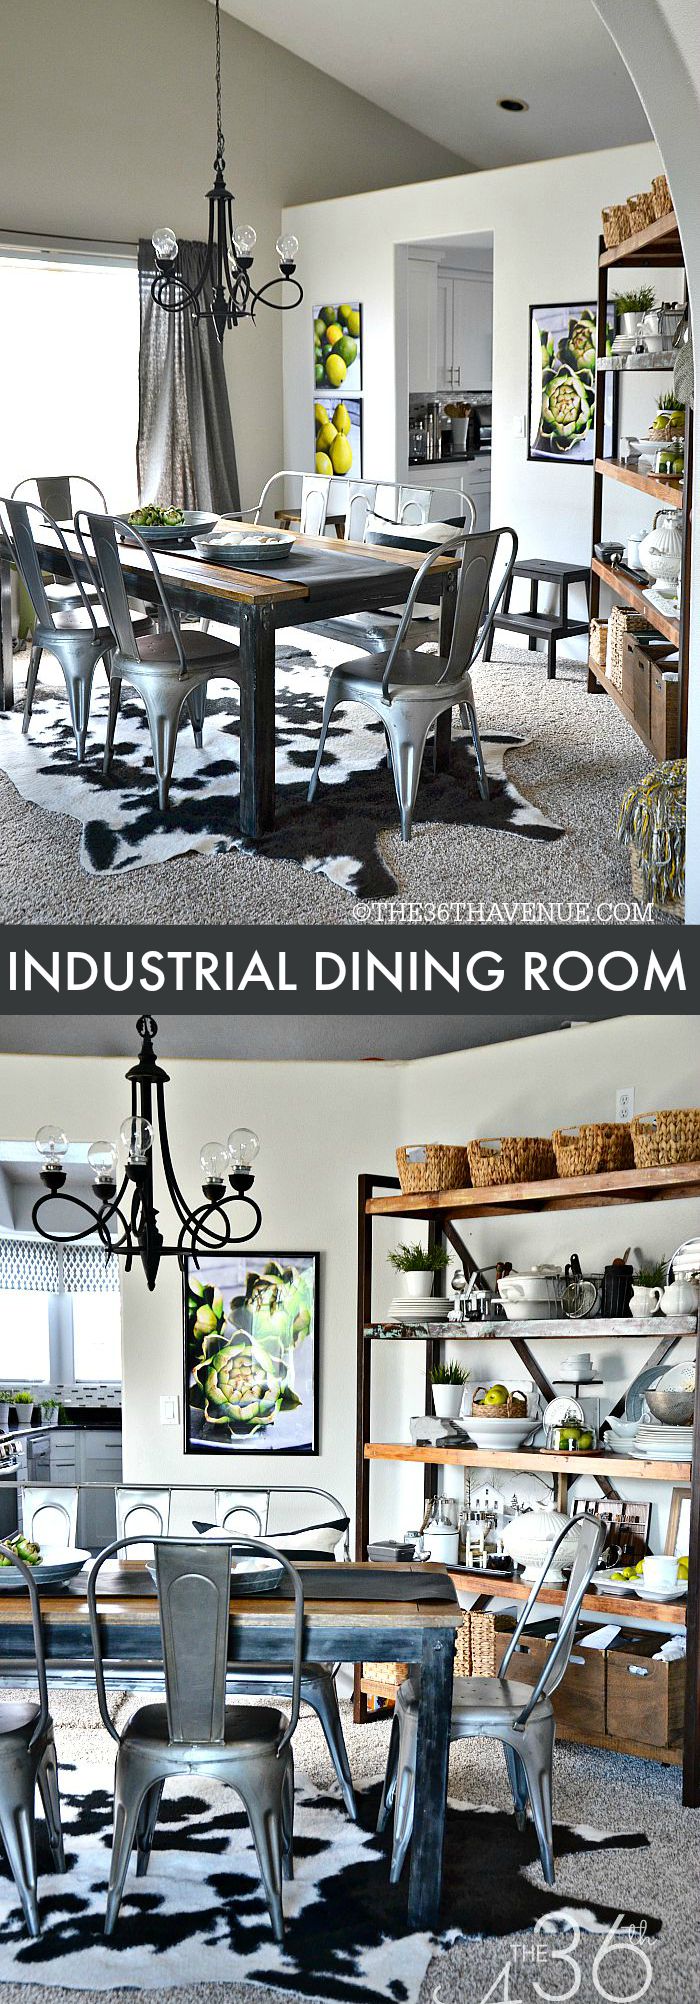 Home Decor - Industrial Dining Room Decor at the36thavenue.com I love this space!